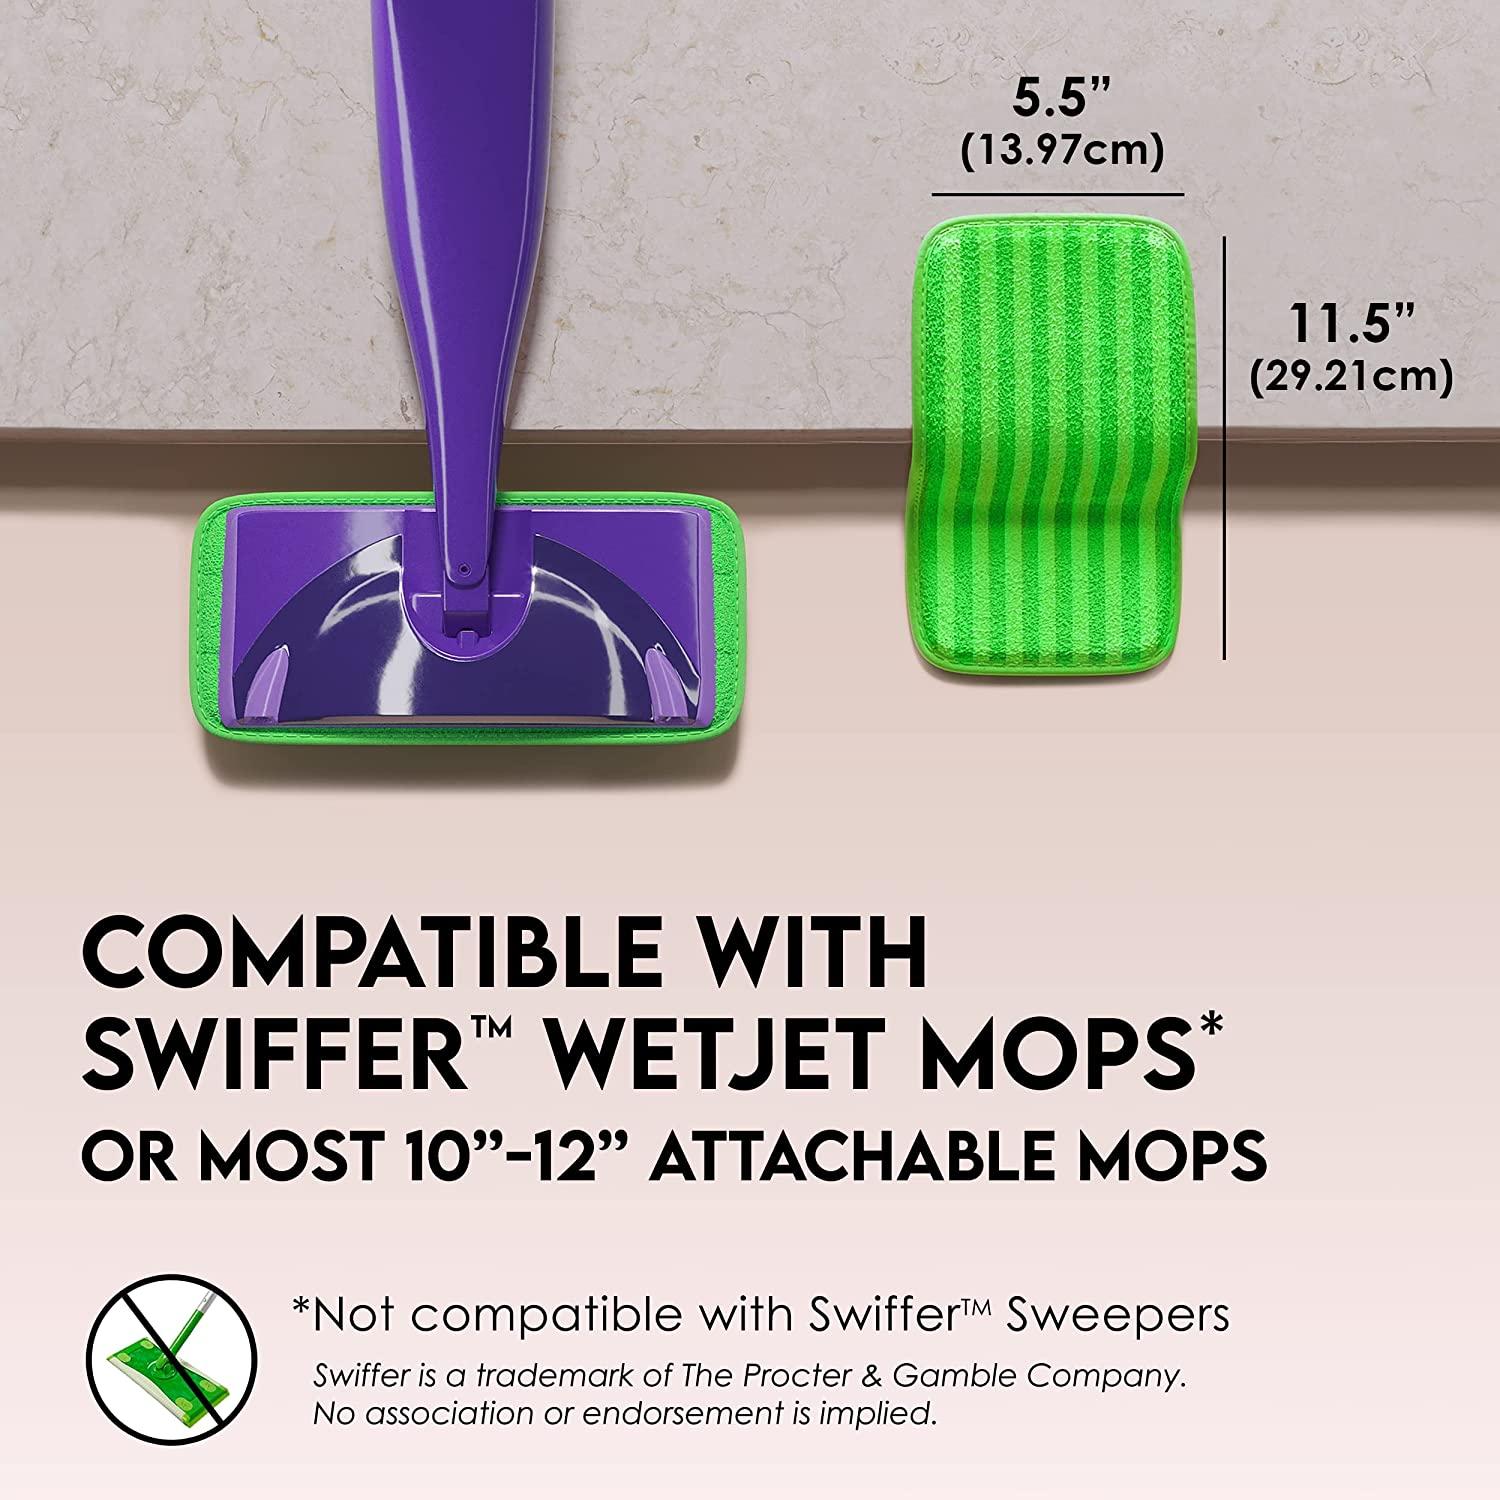 Turbo Mops Reusable Floor Mop Pads - Pack of 2 Machine Washable 12